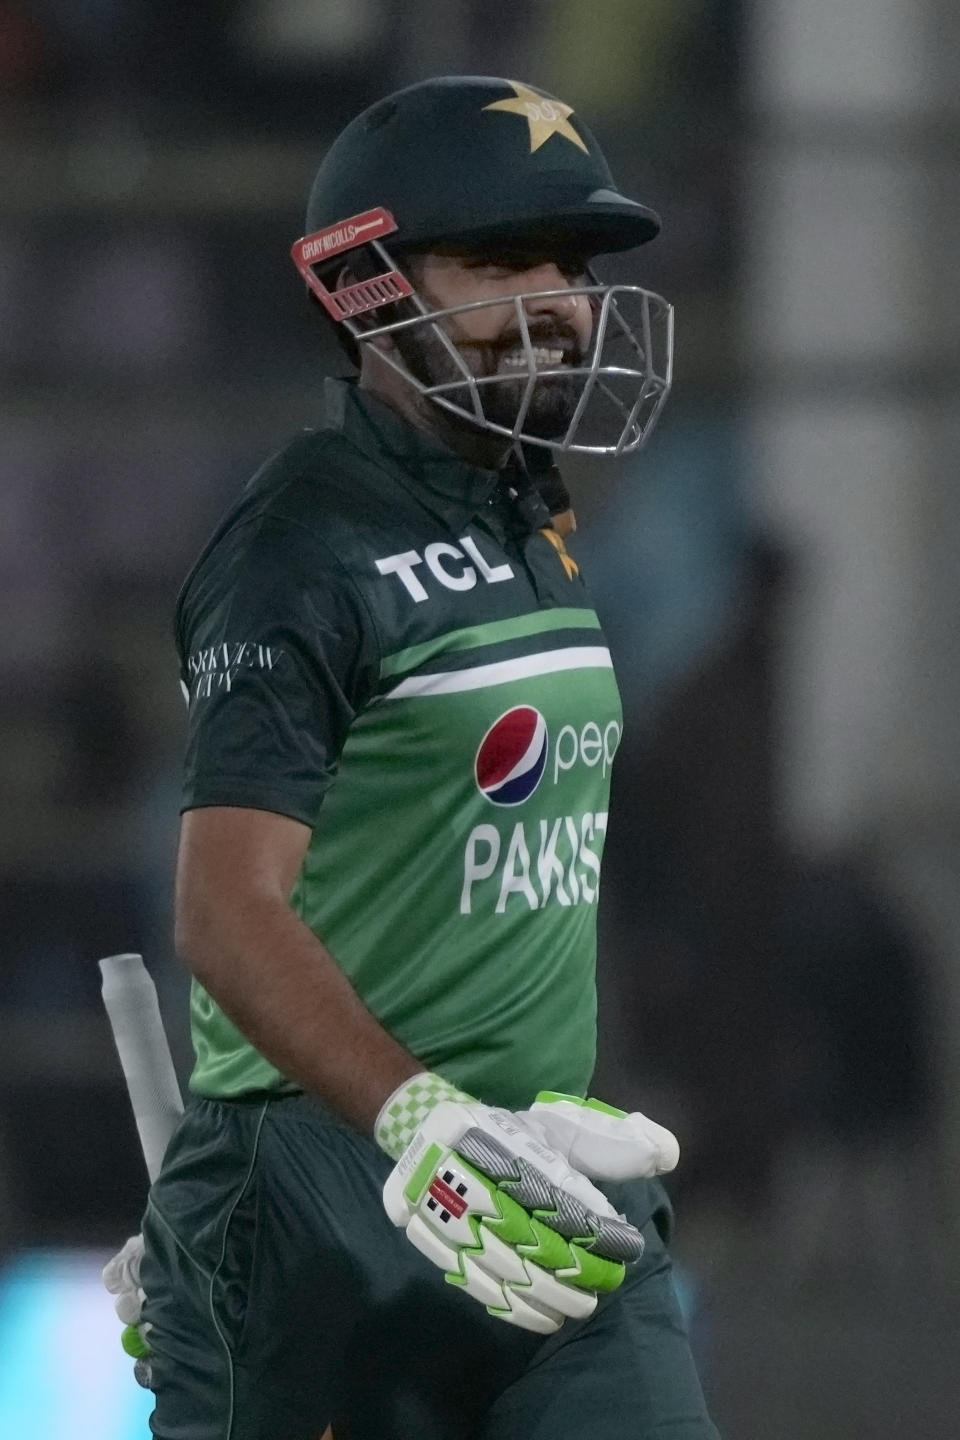 Pakistan's Babar Azam reacts as he walks off the field after his dismissal during the fifth one-day international cricket match between New Zealand and Pakistan, in Karachi, Pakistan, Sunday, May 7, 2023. (AP Photo/Fareed Khan)